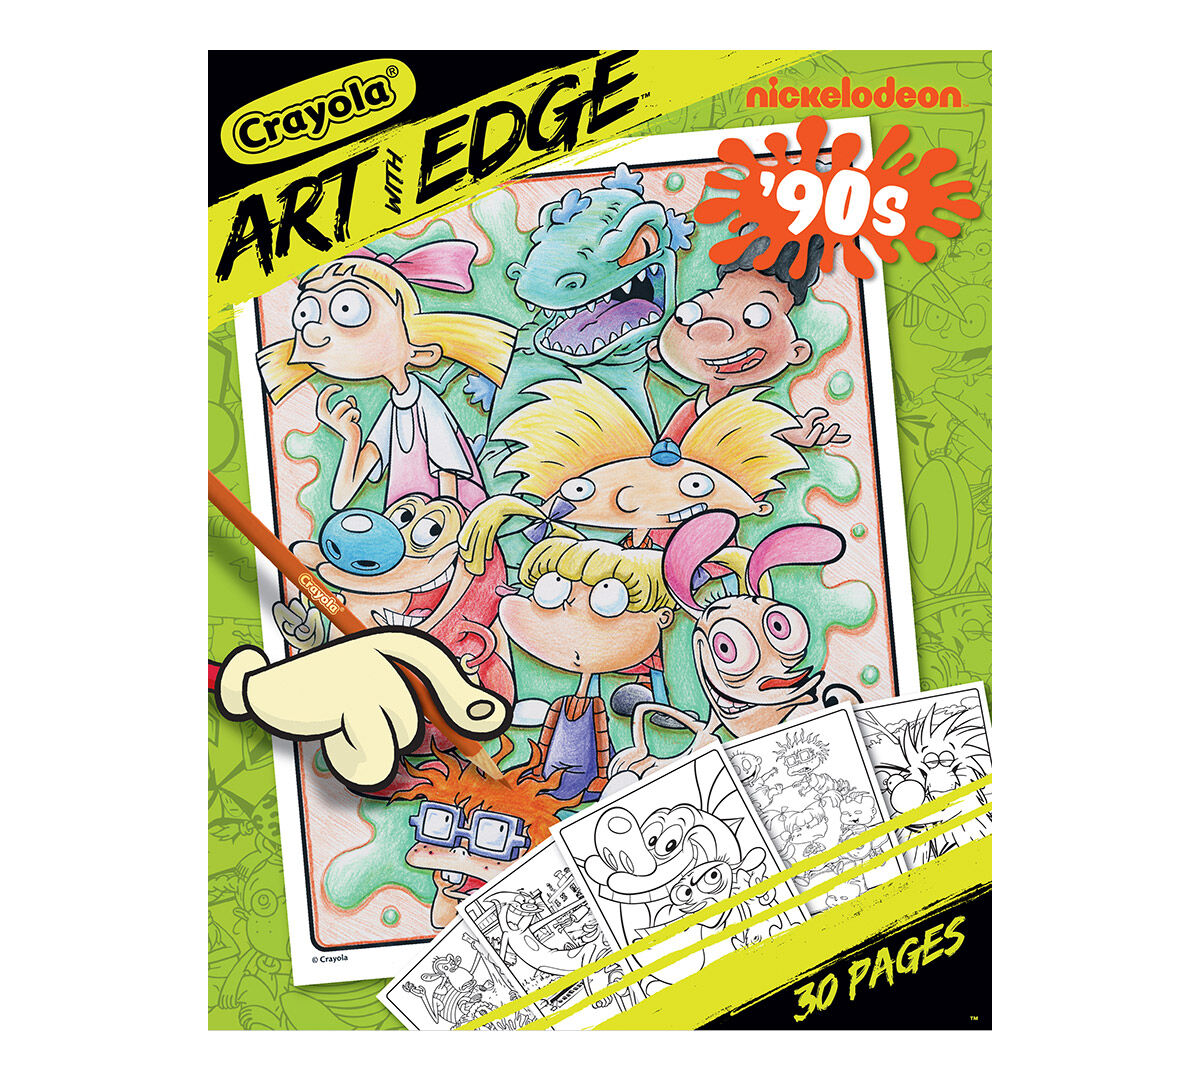 <p>Crayola Art with Edge Nick '90s Premium Coloring Pages combine favorite '90s cartoons from Nickelodeon with the fun and creativity of coloring, letting adults and kids alike enjoy adding color and life to iconic characters.  </p>